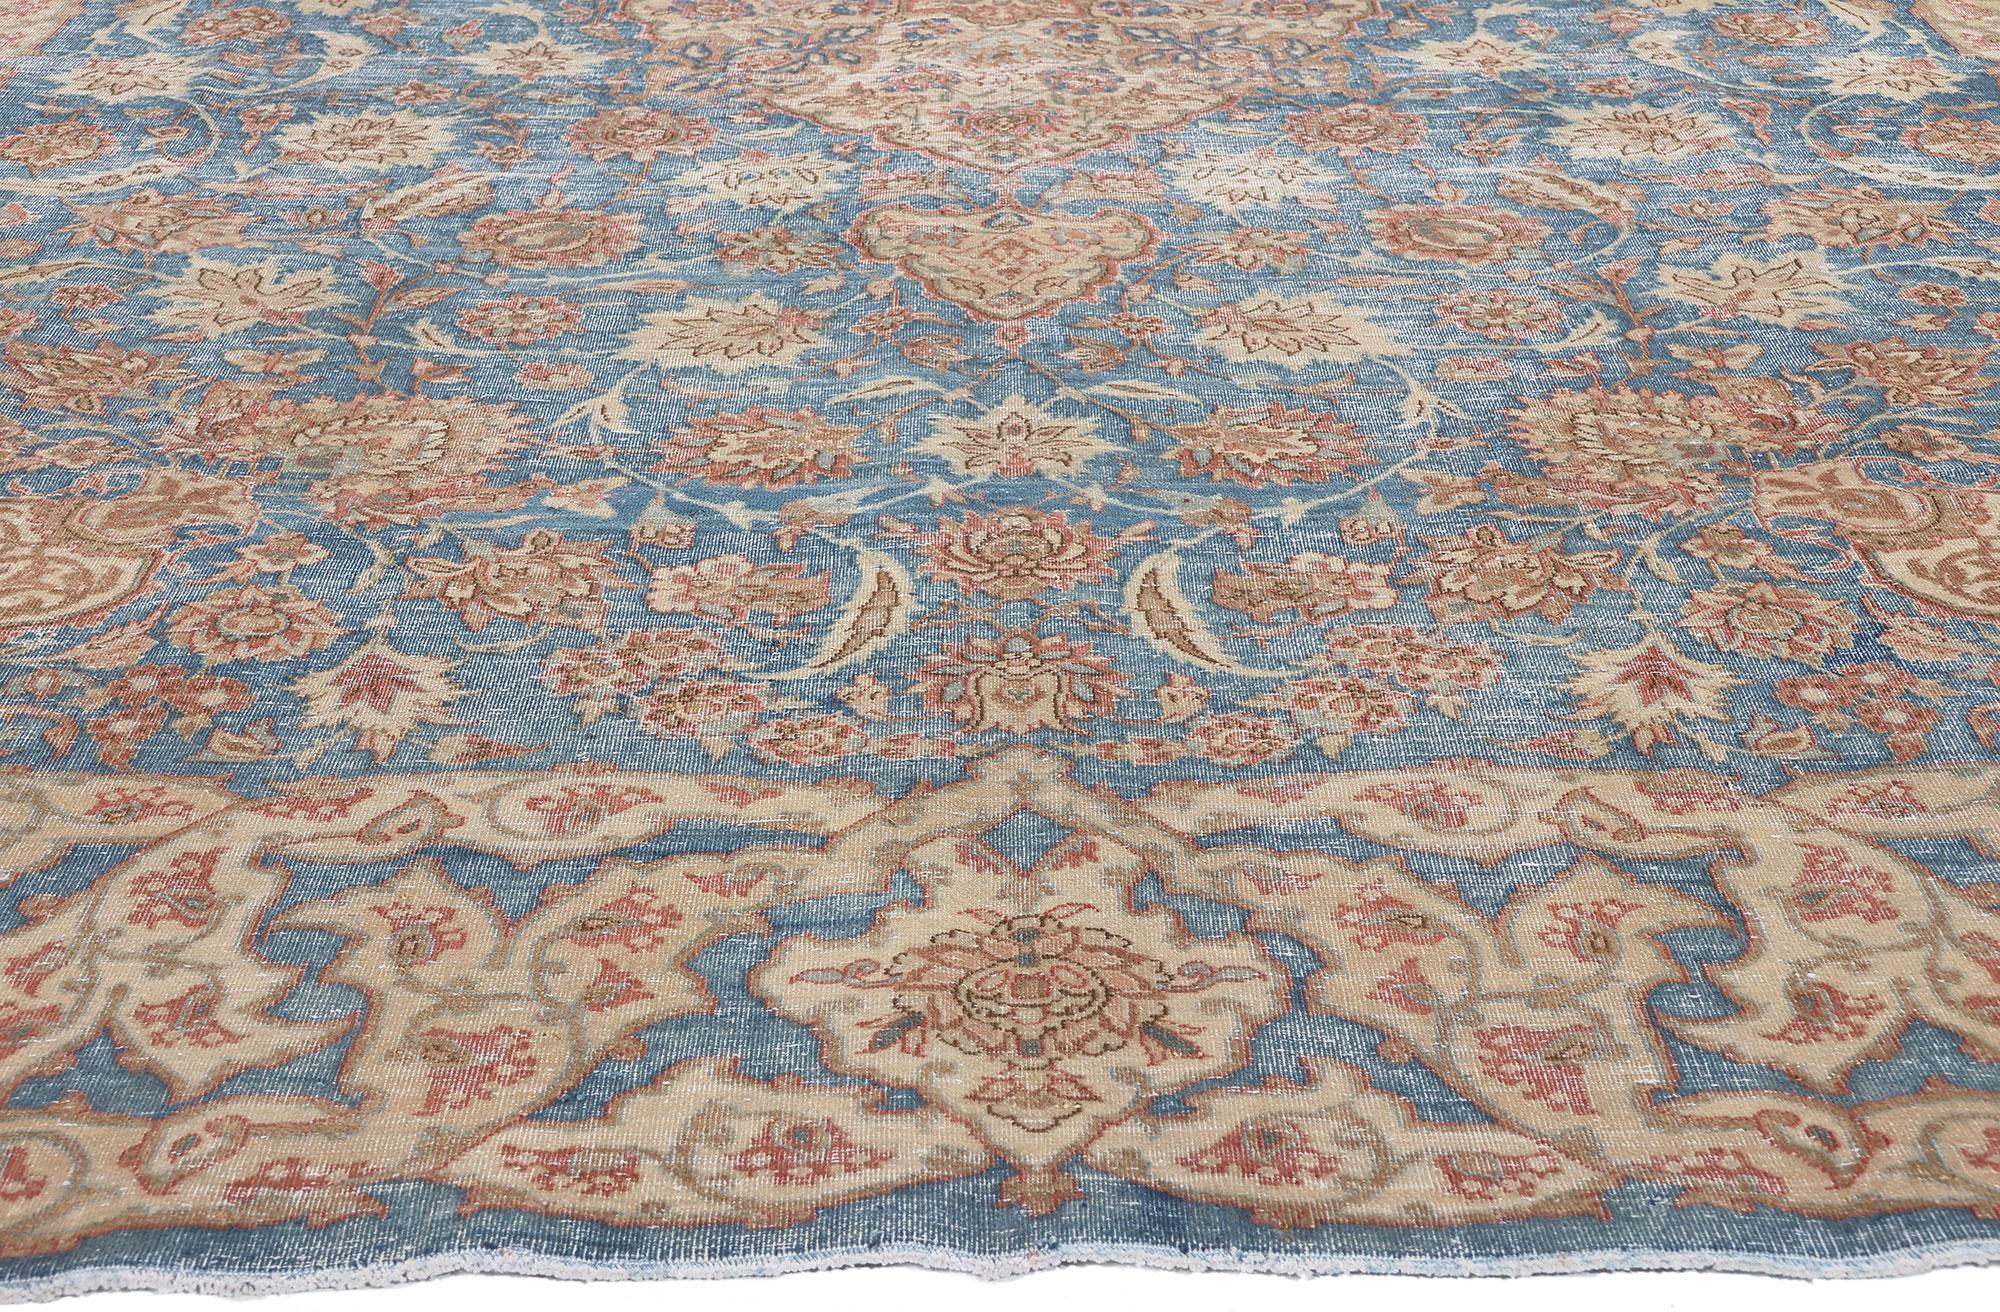 61251 Vintage Blue Persian Isfahan Rug, 08'02 x 11'07. ​Nestled in the heart of central Iran lies a haven of artistry and tradition: the captivating city of Isfahan. Here, amid whispers of ancient legends and the lingering echoes of masterful